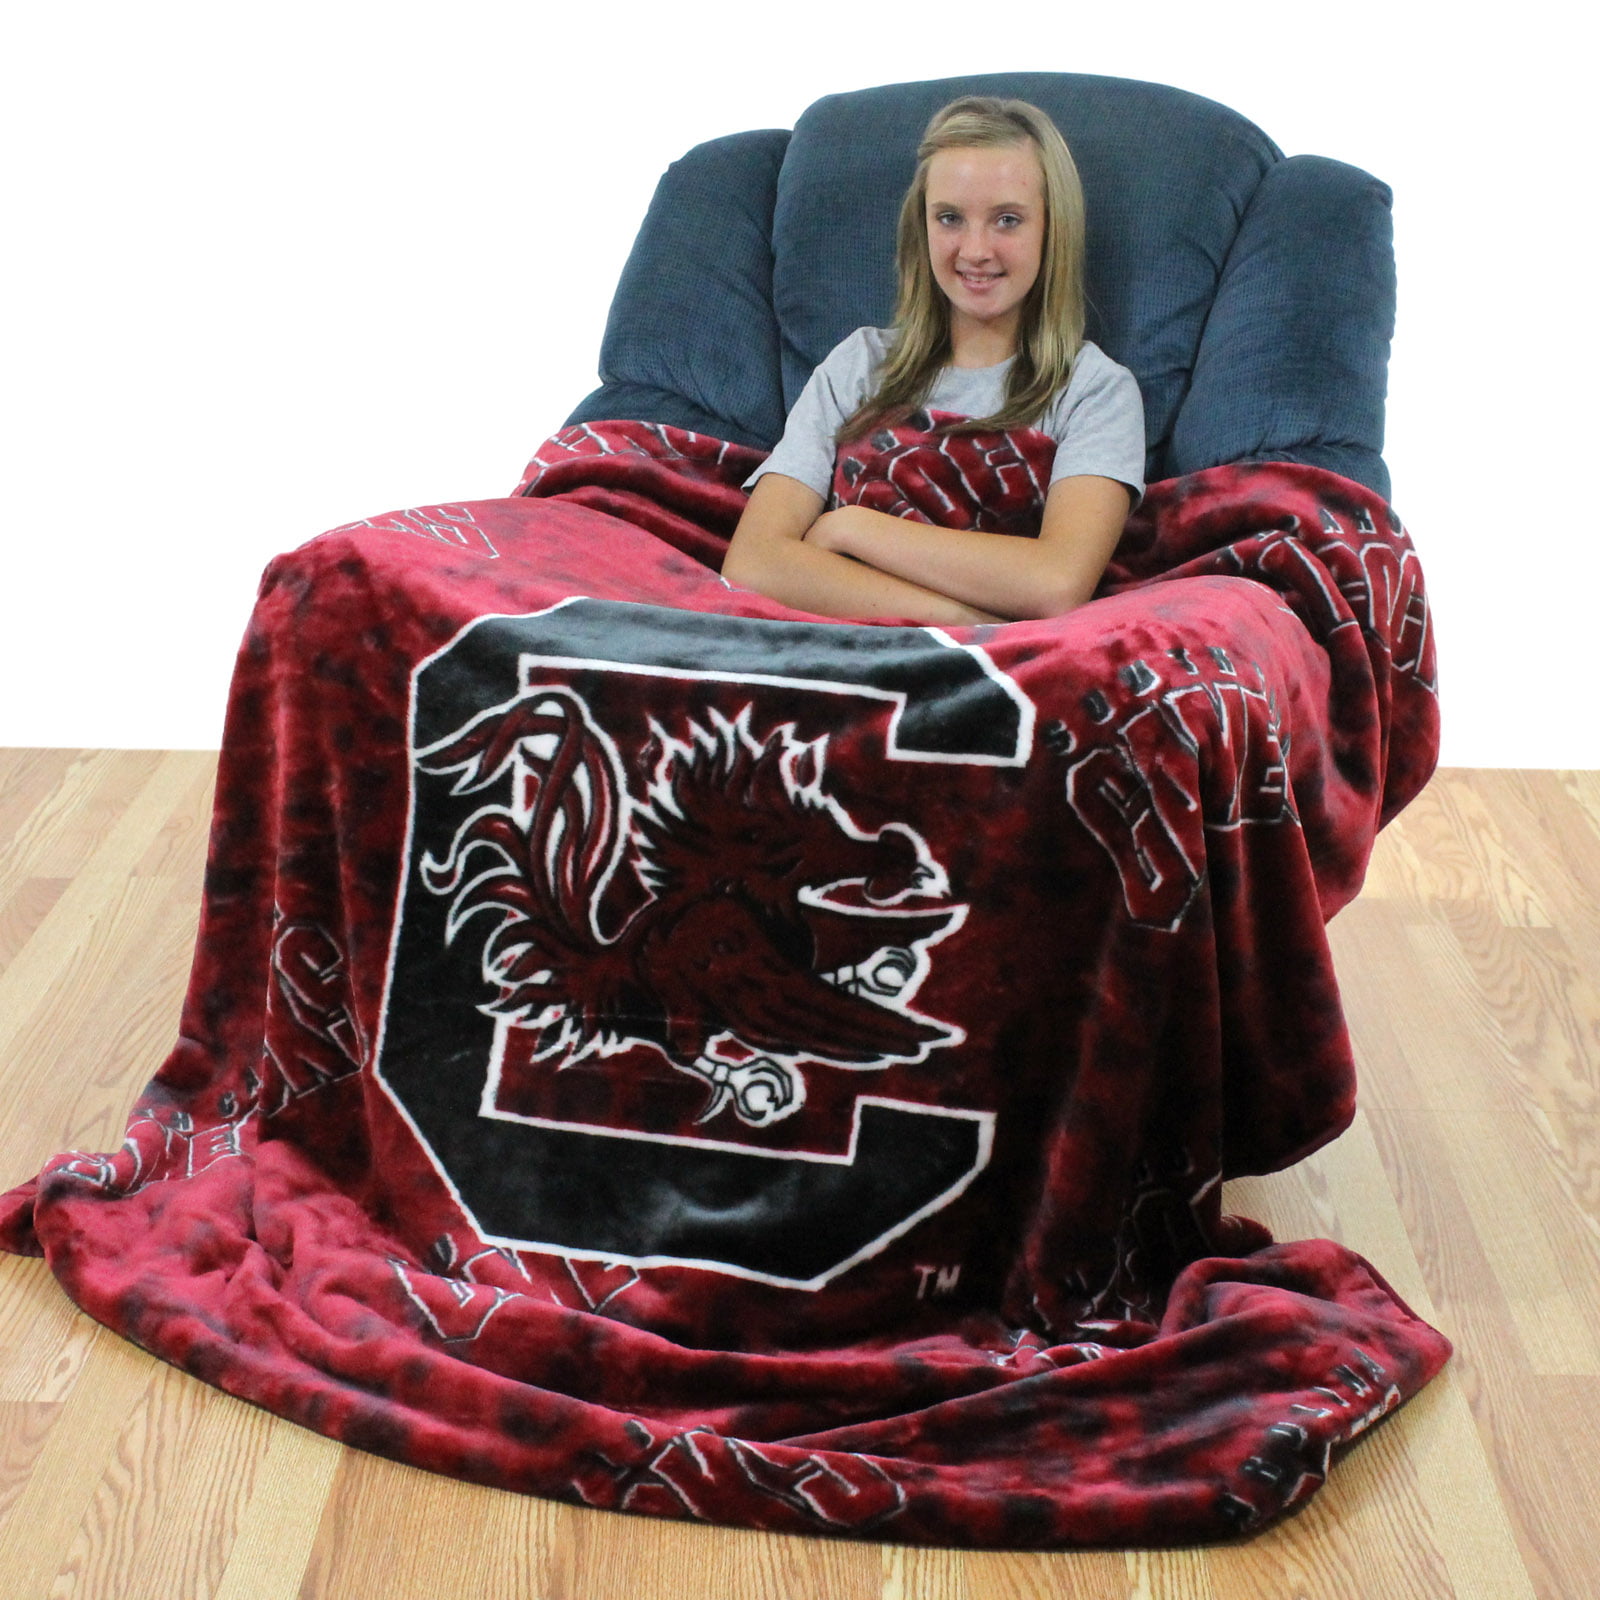 50 x 60 College Covers South Carolina Gamecocks Throw Blanket